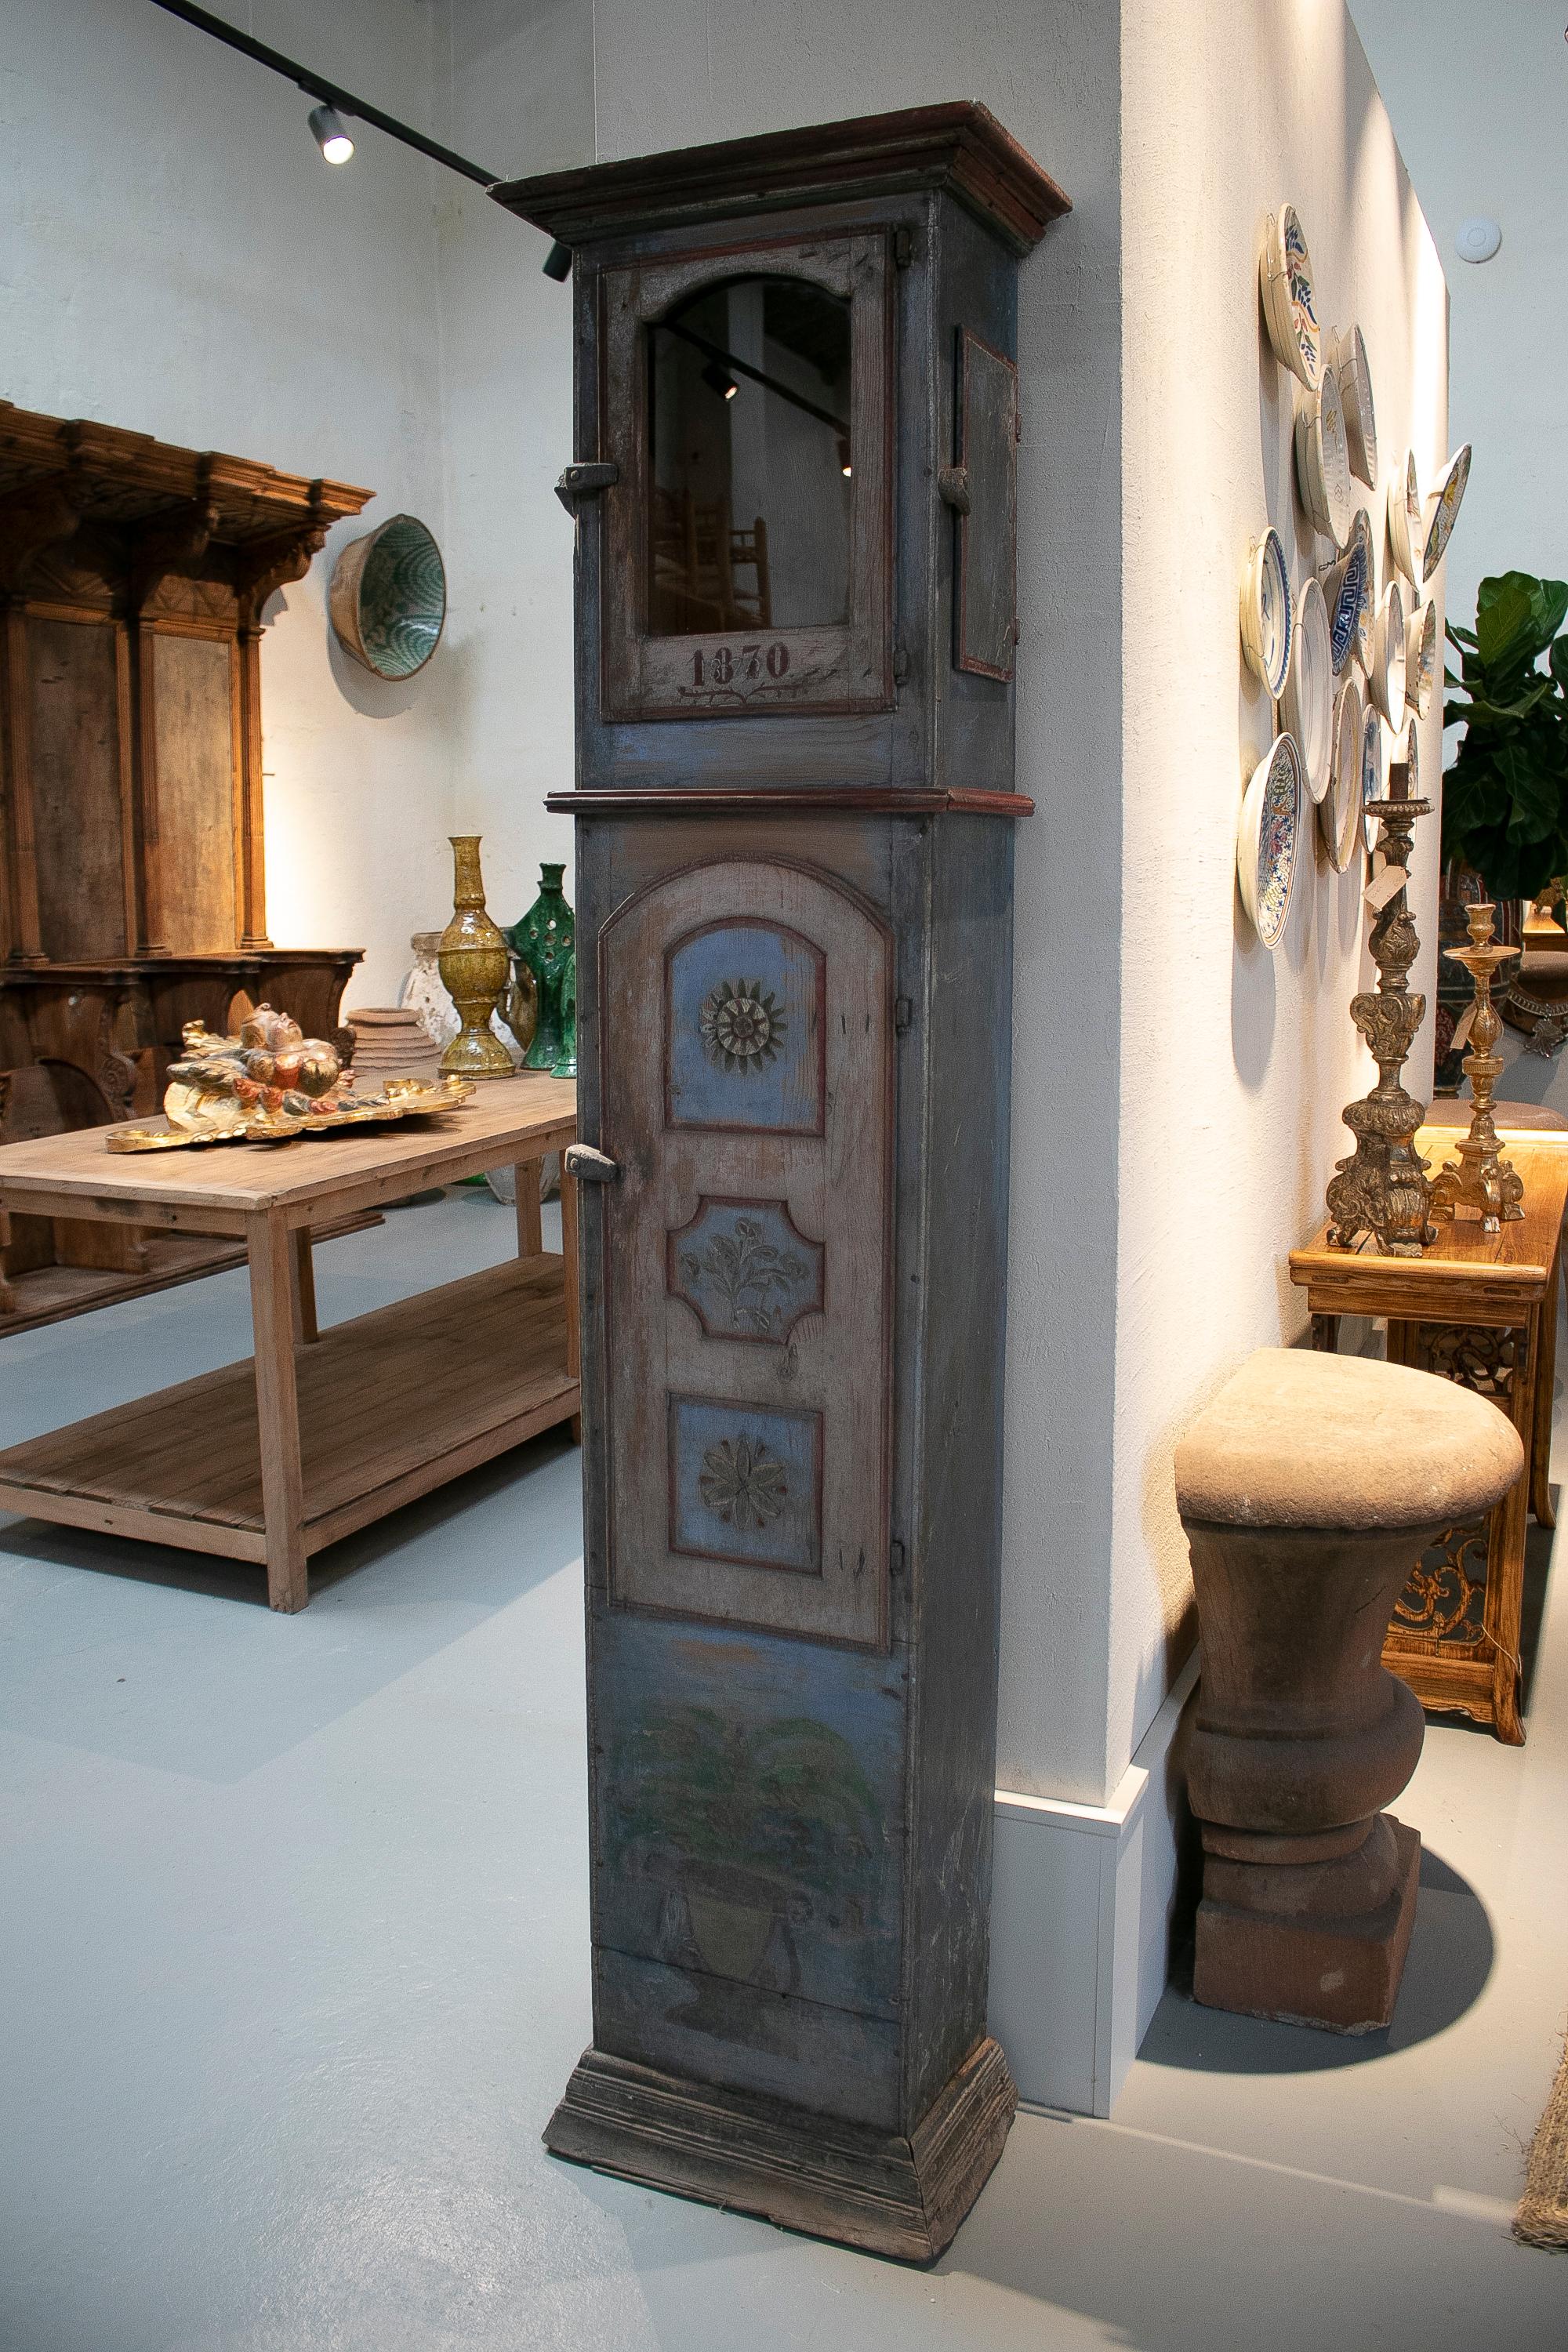 1870 dated Swiss painted standing clock wooden housing.